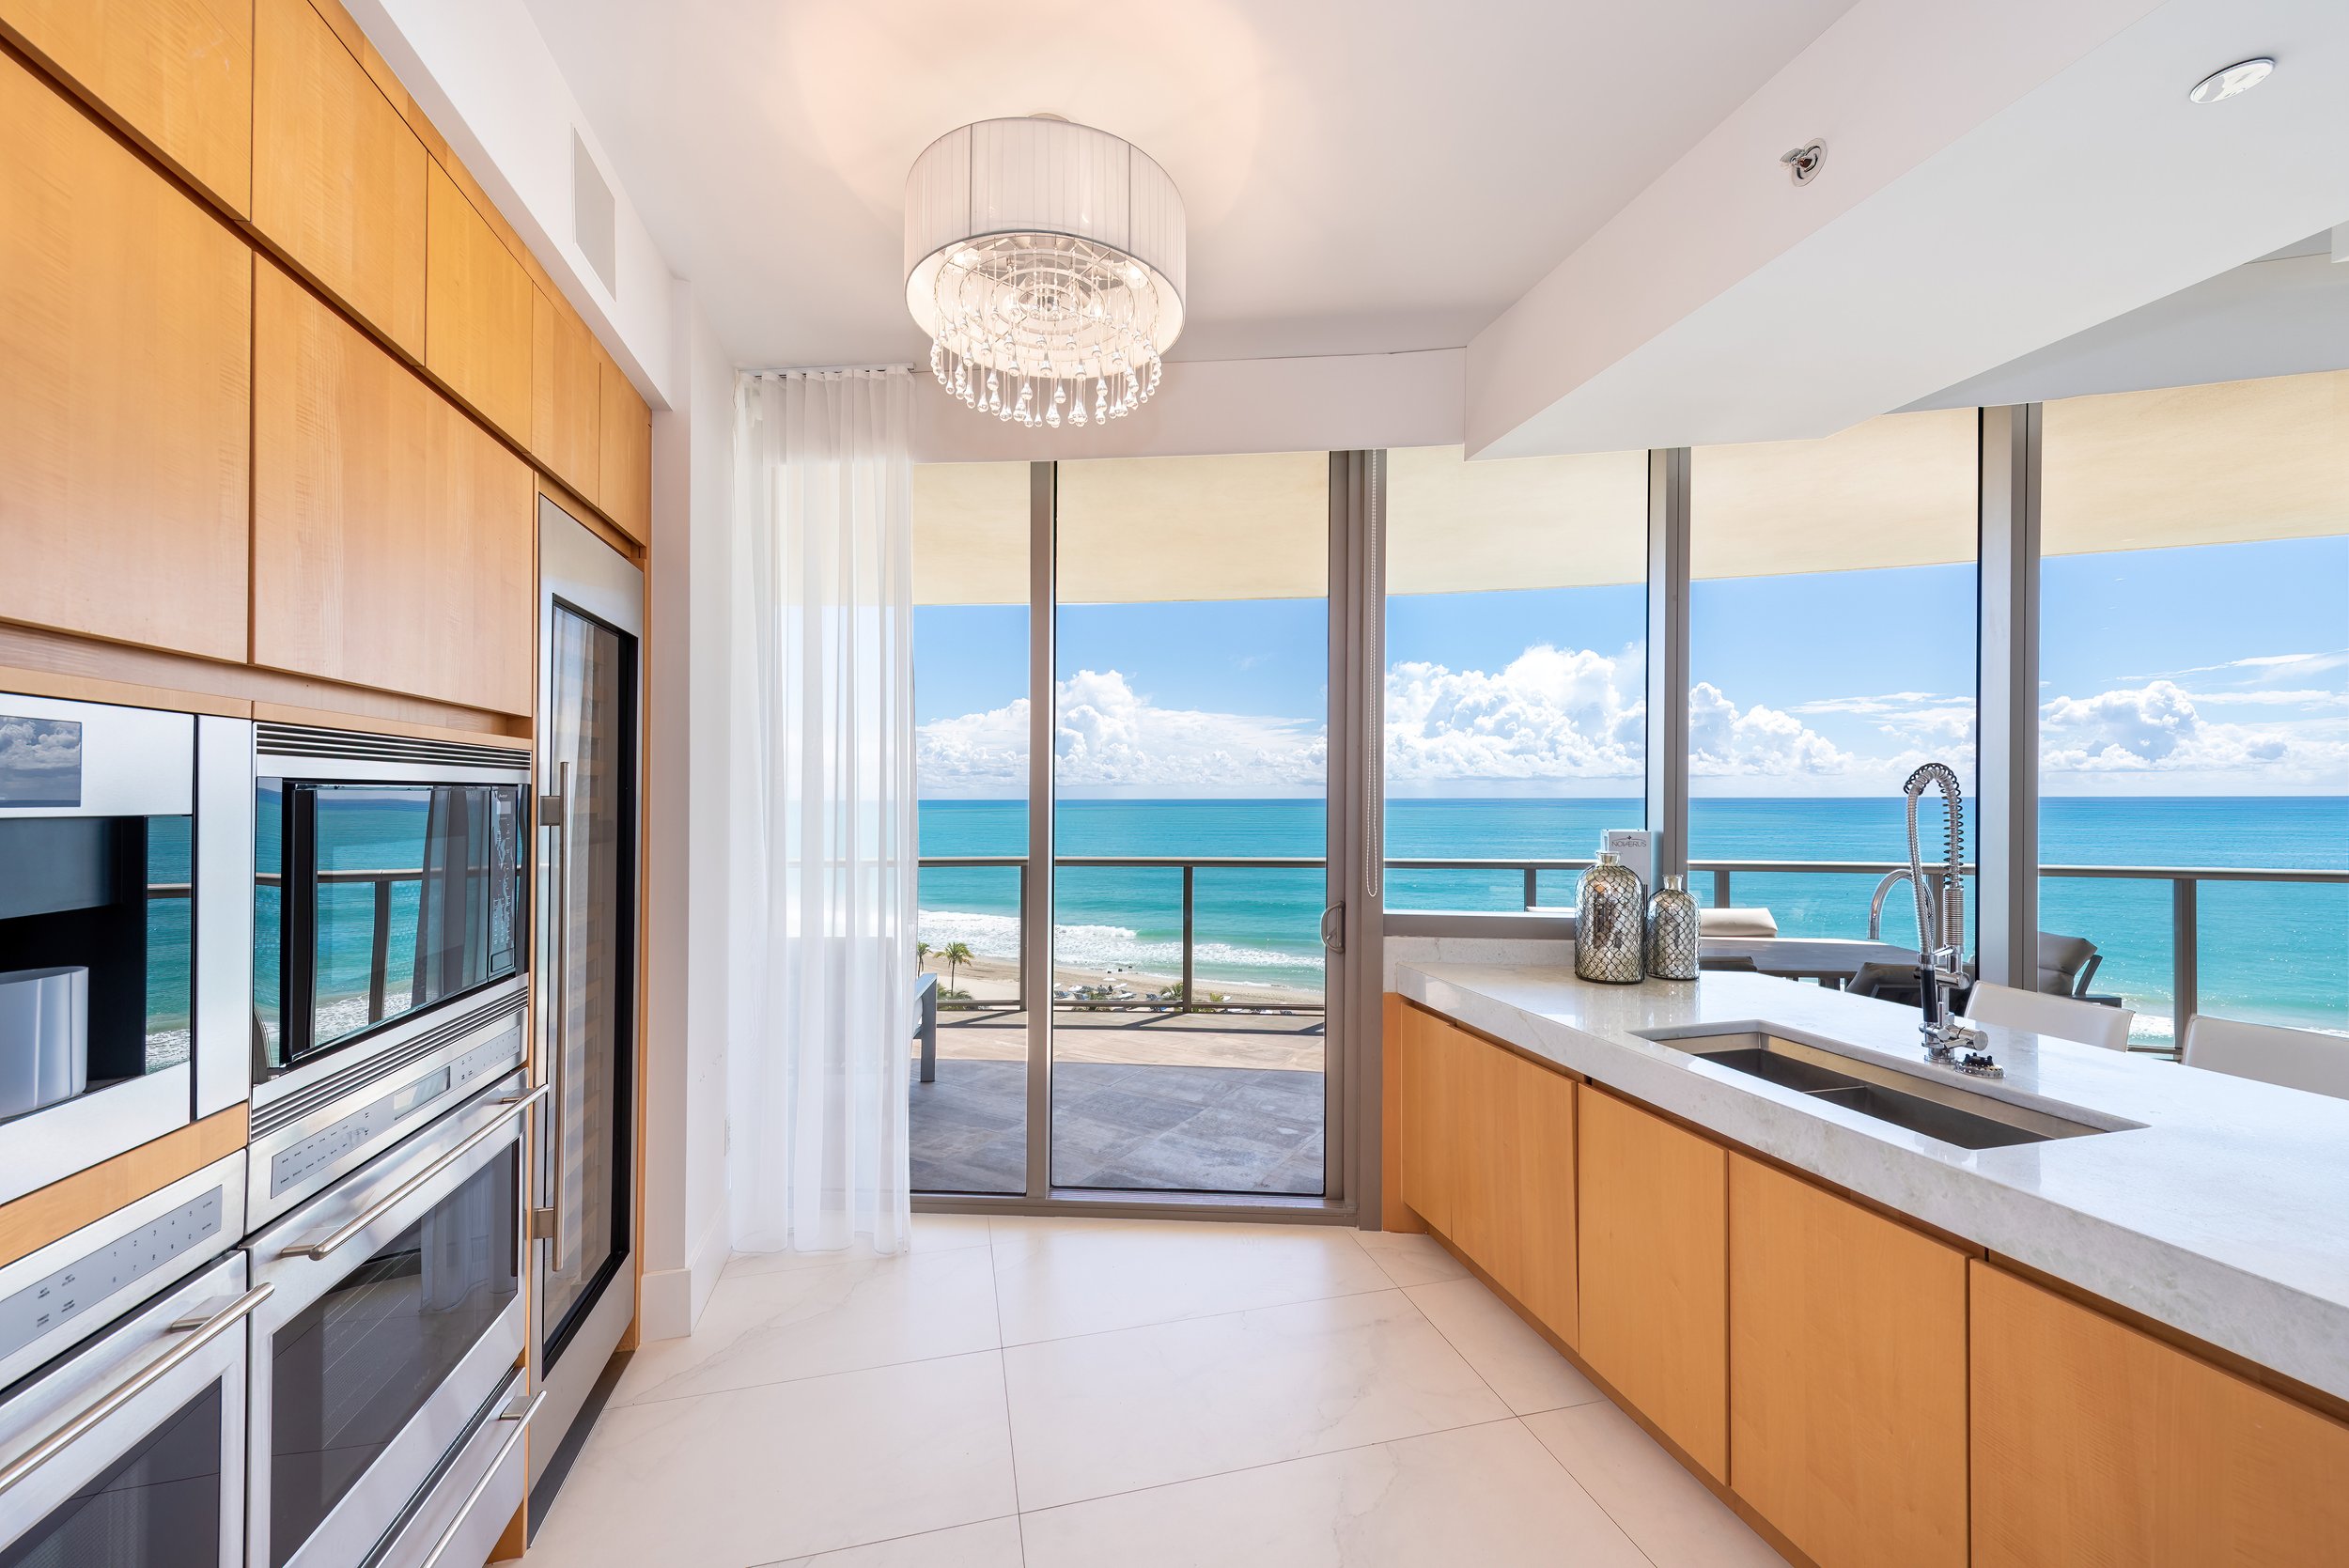 Master Brokers Forum Listing: See The Views From This Beachfront Condo In St. Regis Bal Harbour Asking $10.995 Million 16.JPG